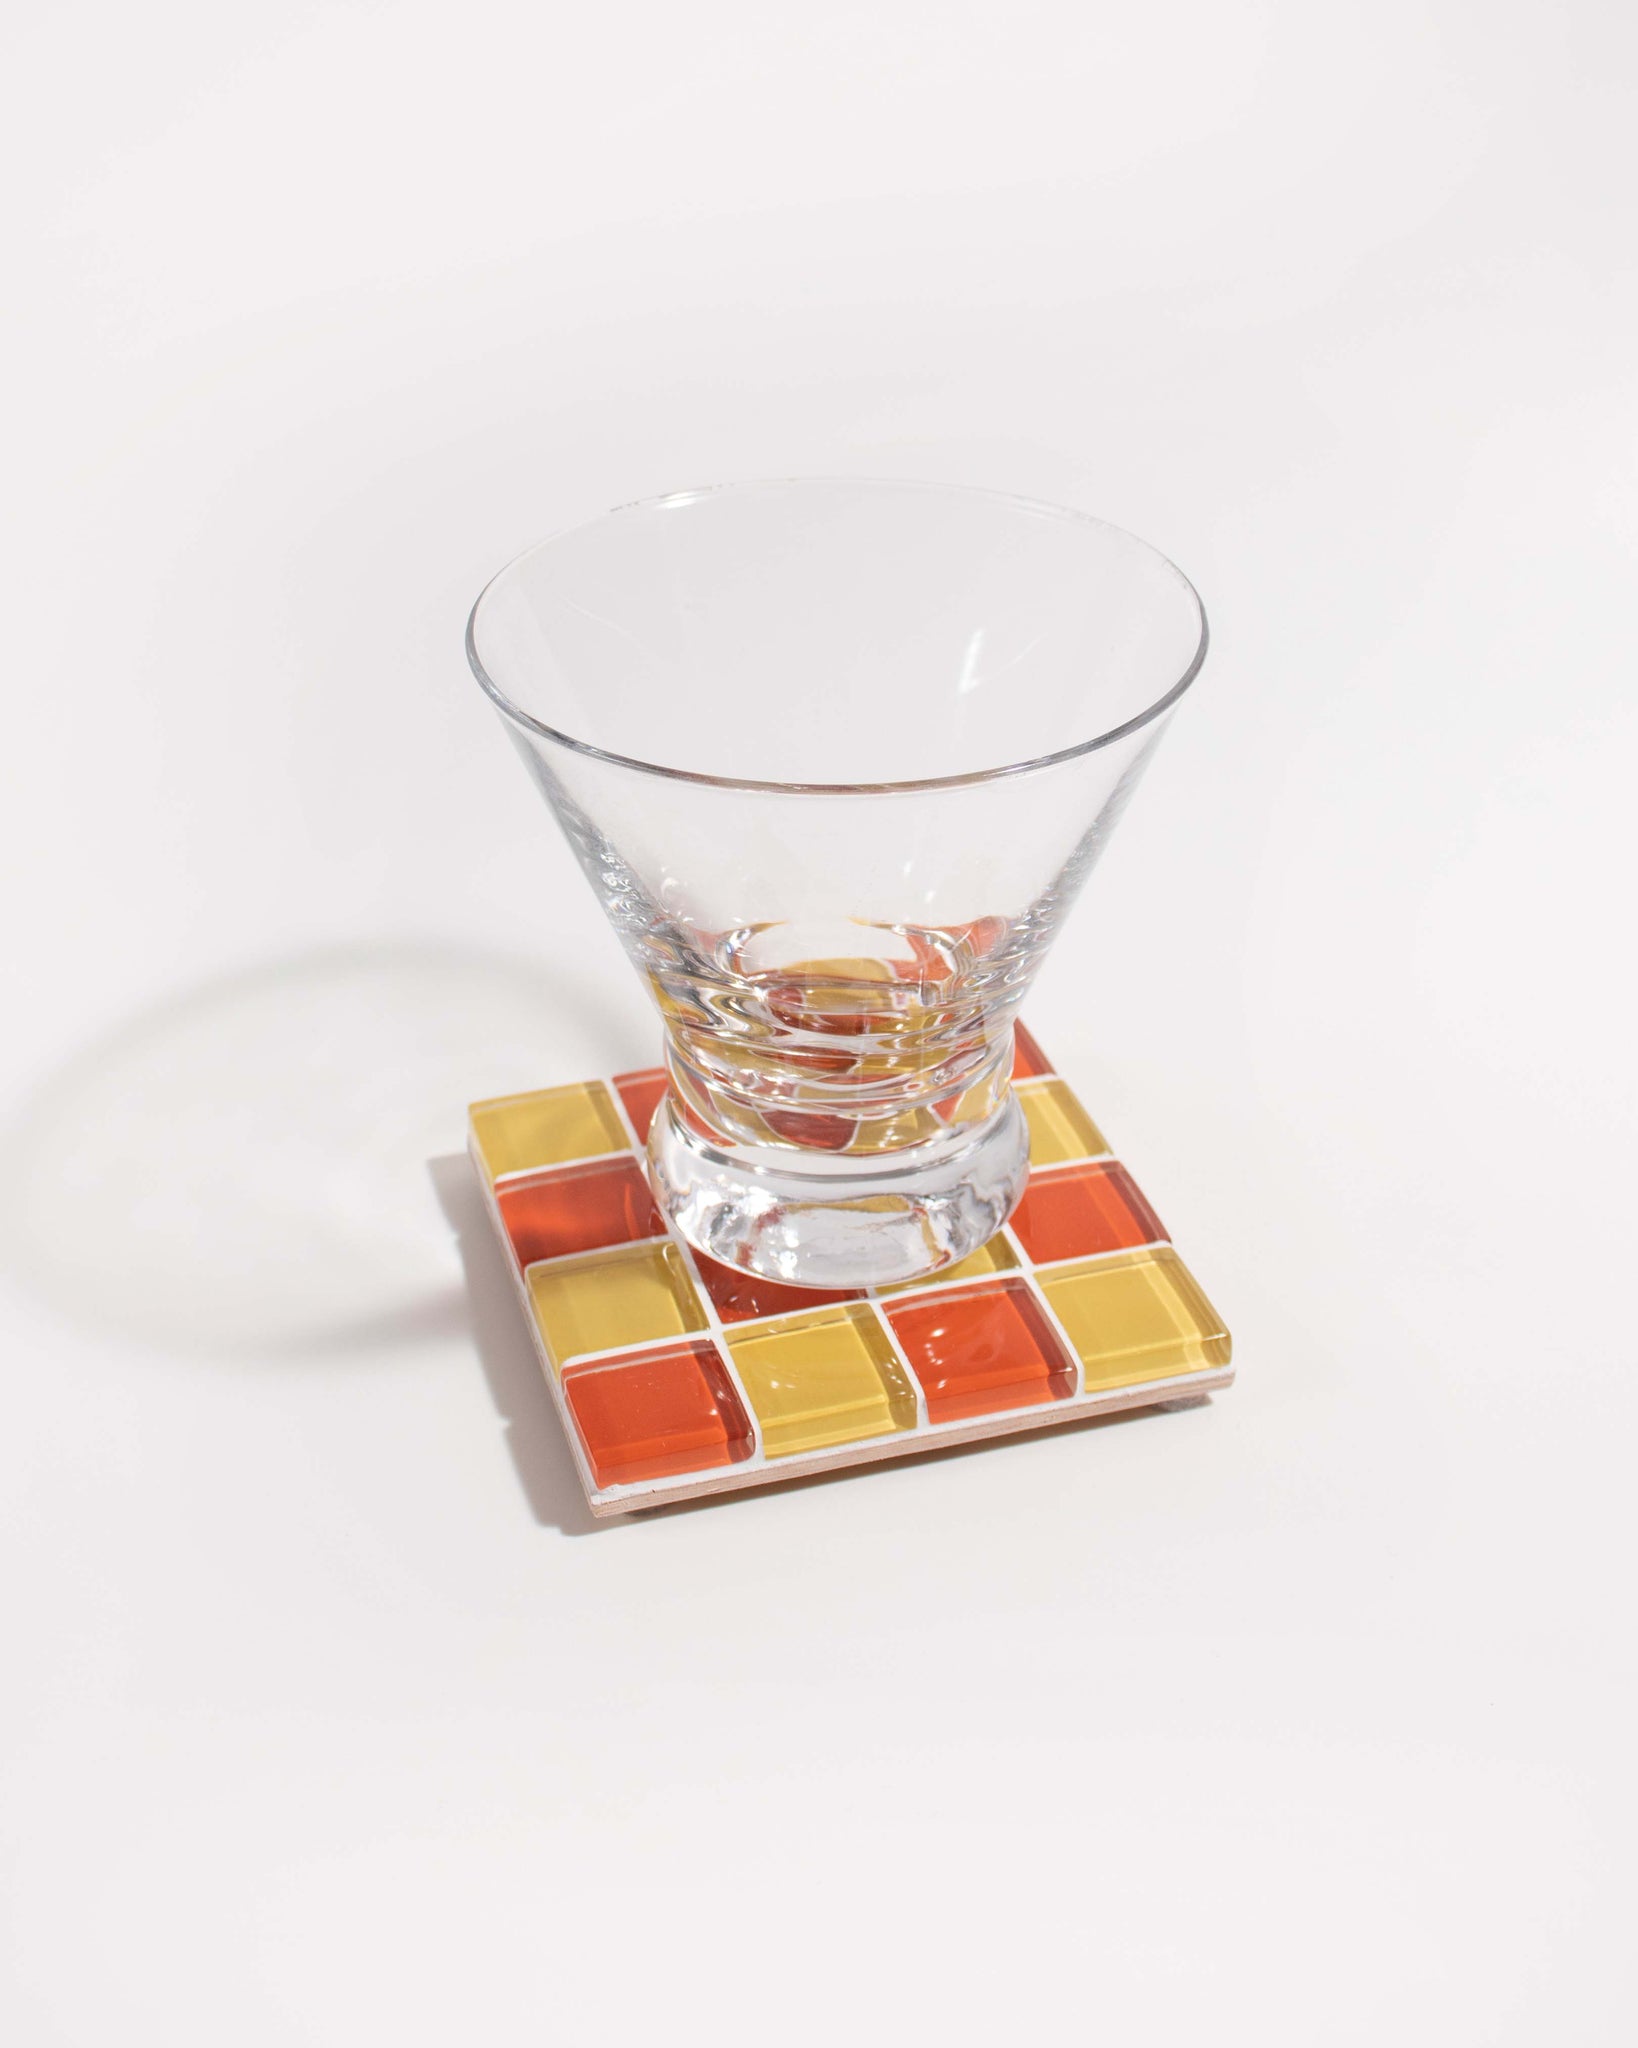 GLASS TILE COASTER - Candy Cone